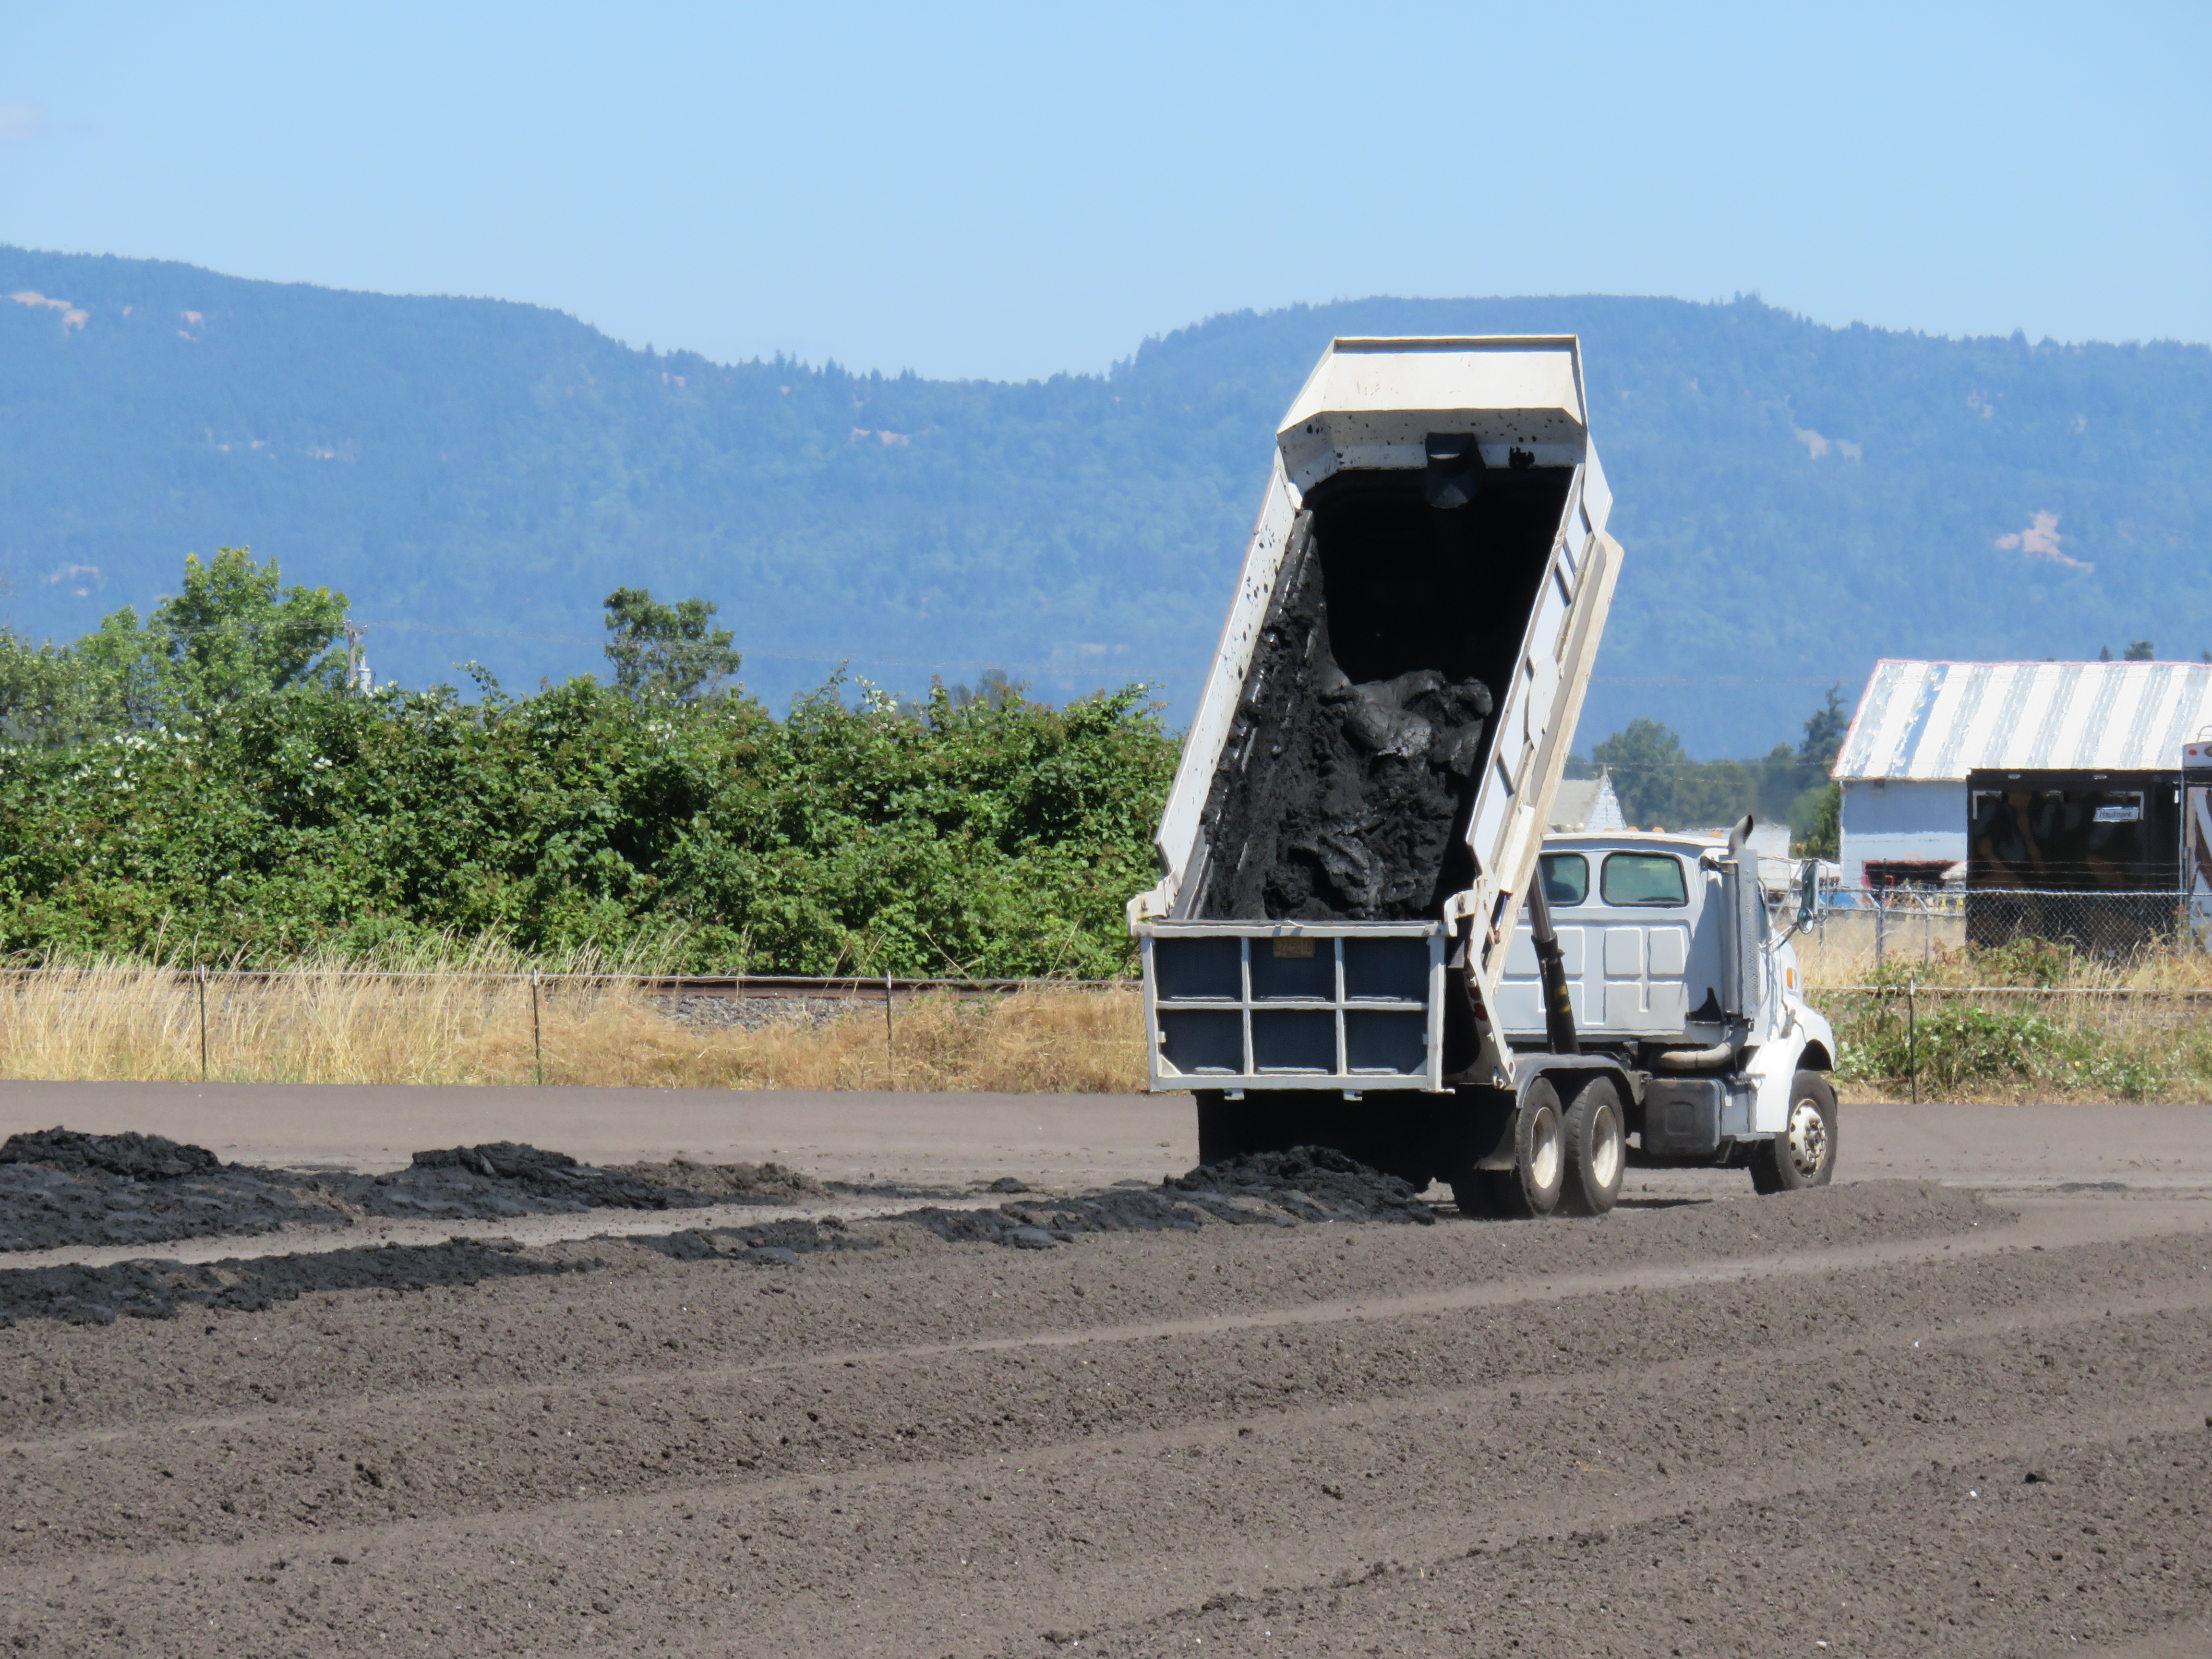 Laying out biosolids in drying beds